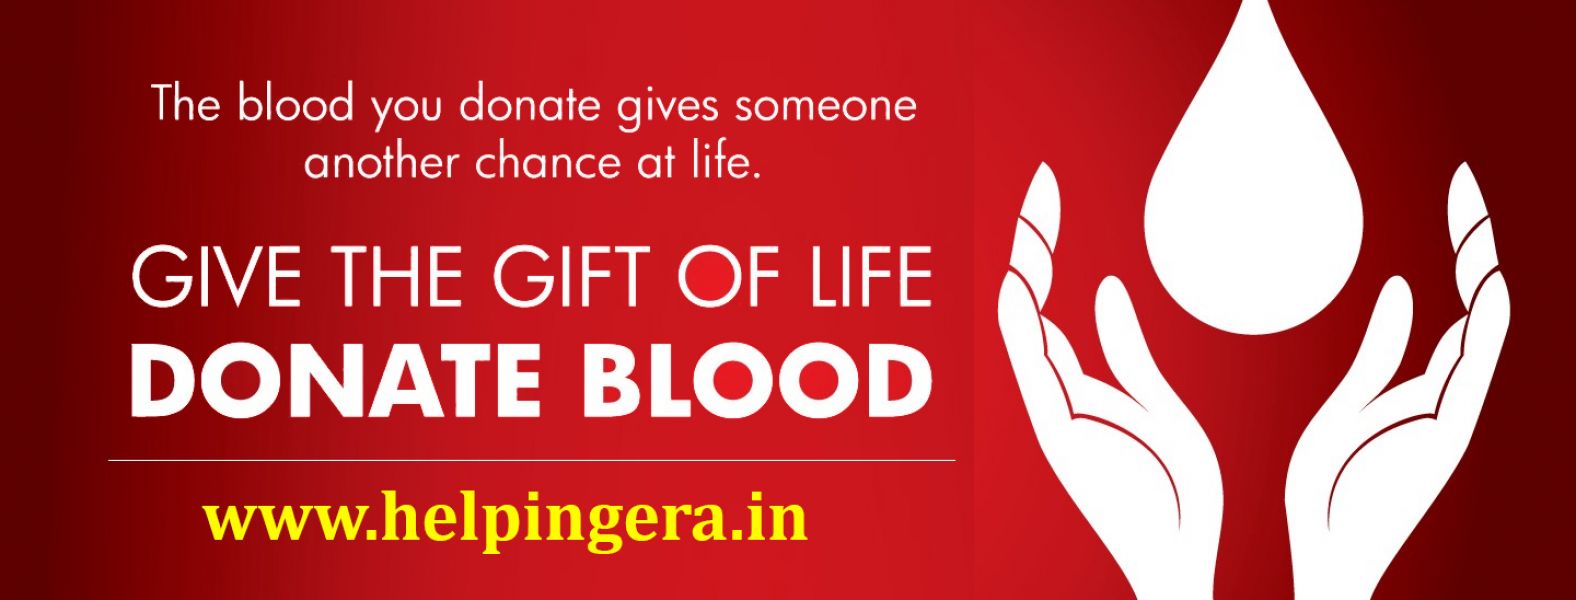 BLOOD DONATION | DONATE BLOOD SAVE LIVES | www.helpingera.in